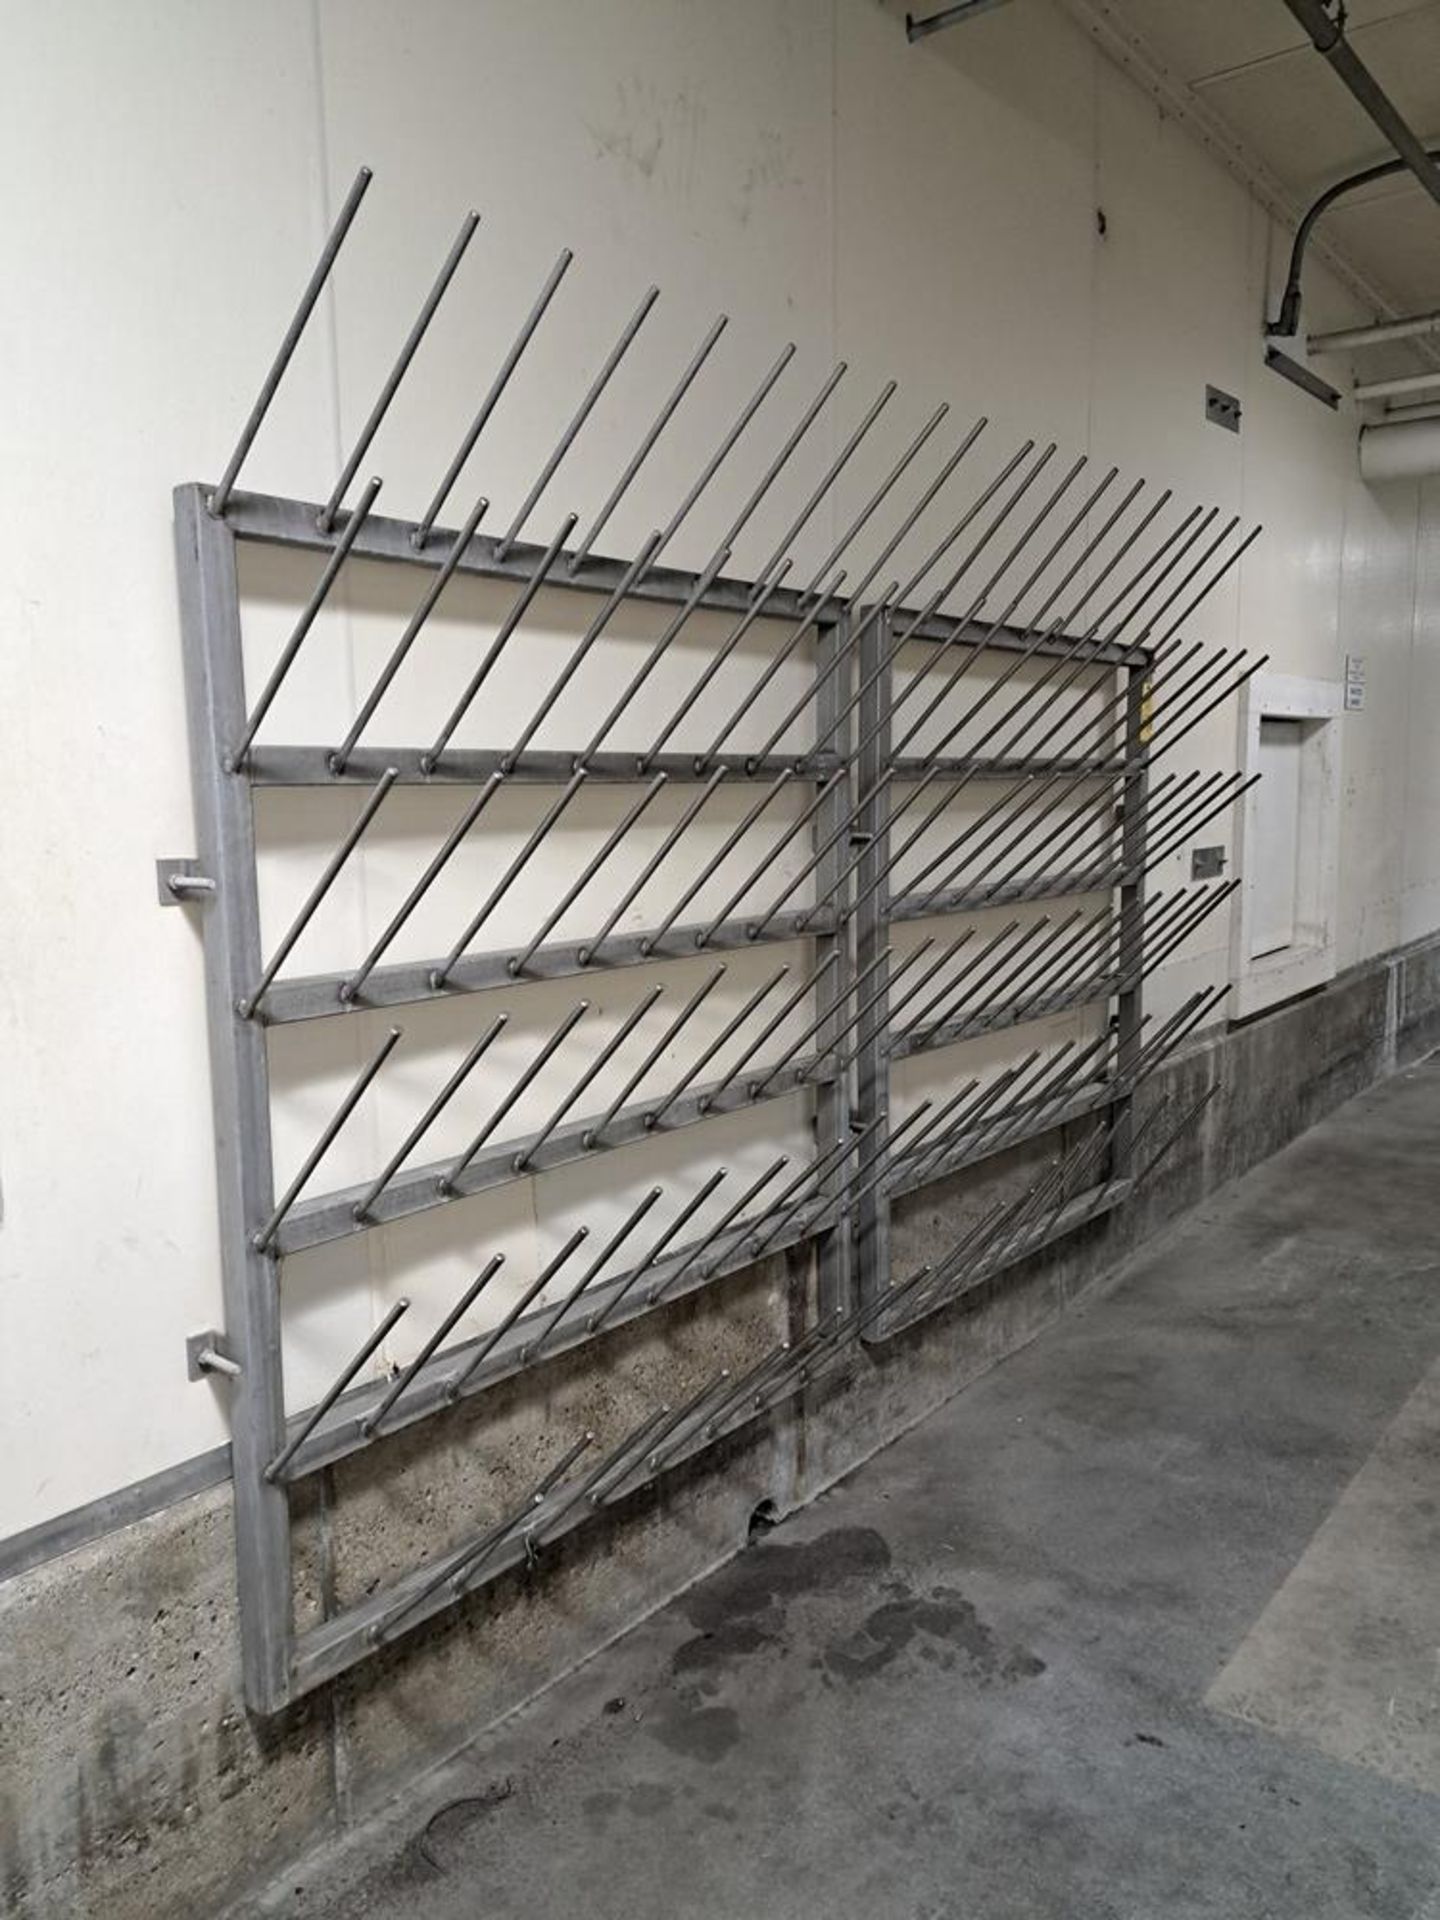 Lot Chad Boot Wash, 4 bottom brushes, 8' long overall, (1) Stainless steel wall mounted boot spikes: - Image 4 of 4